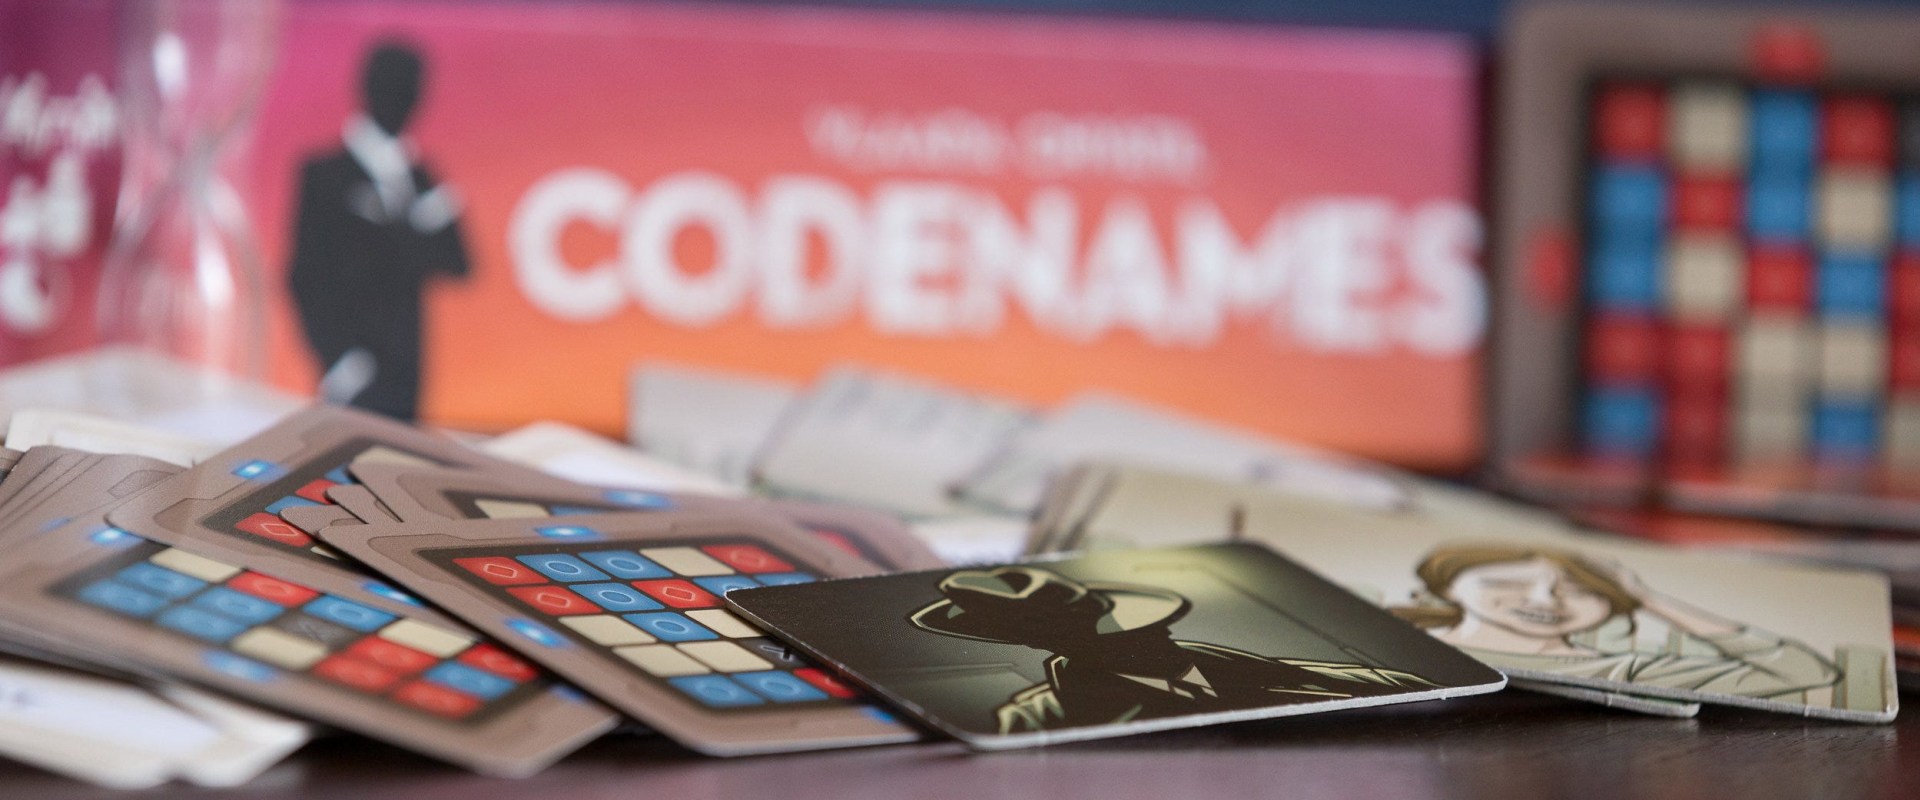 A Deep Dive into Codenames: The Ultimate Guide to This Popular Board Game